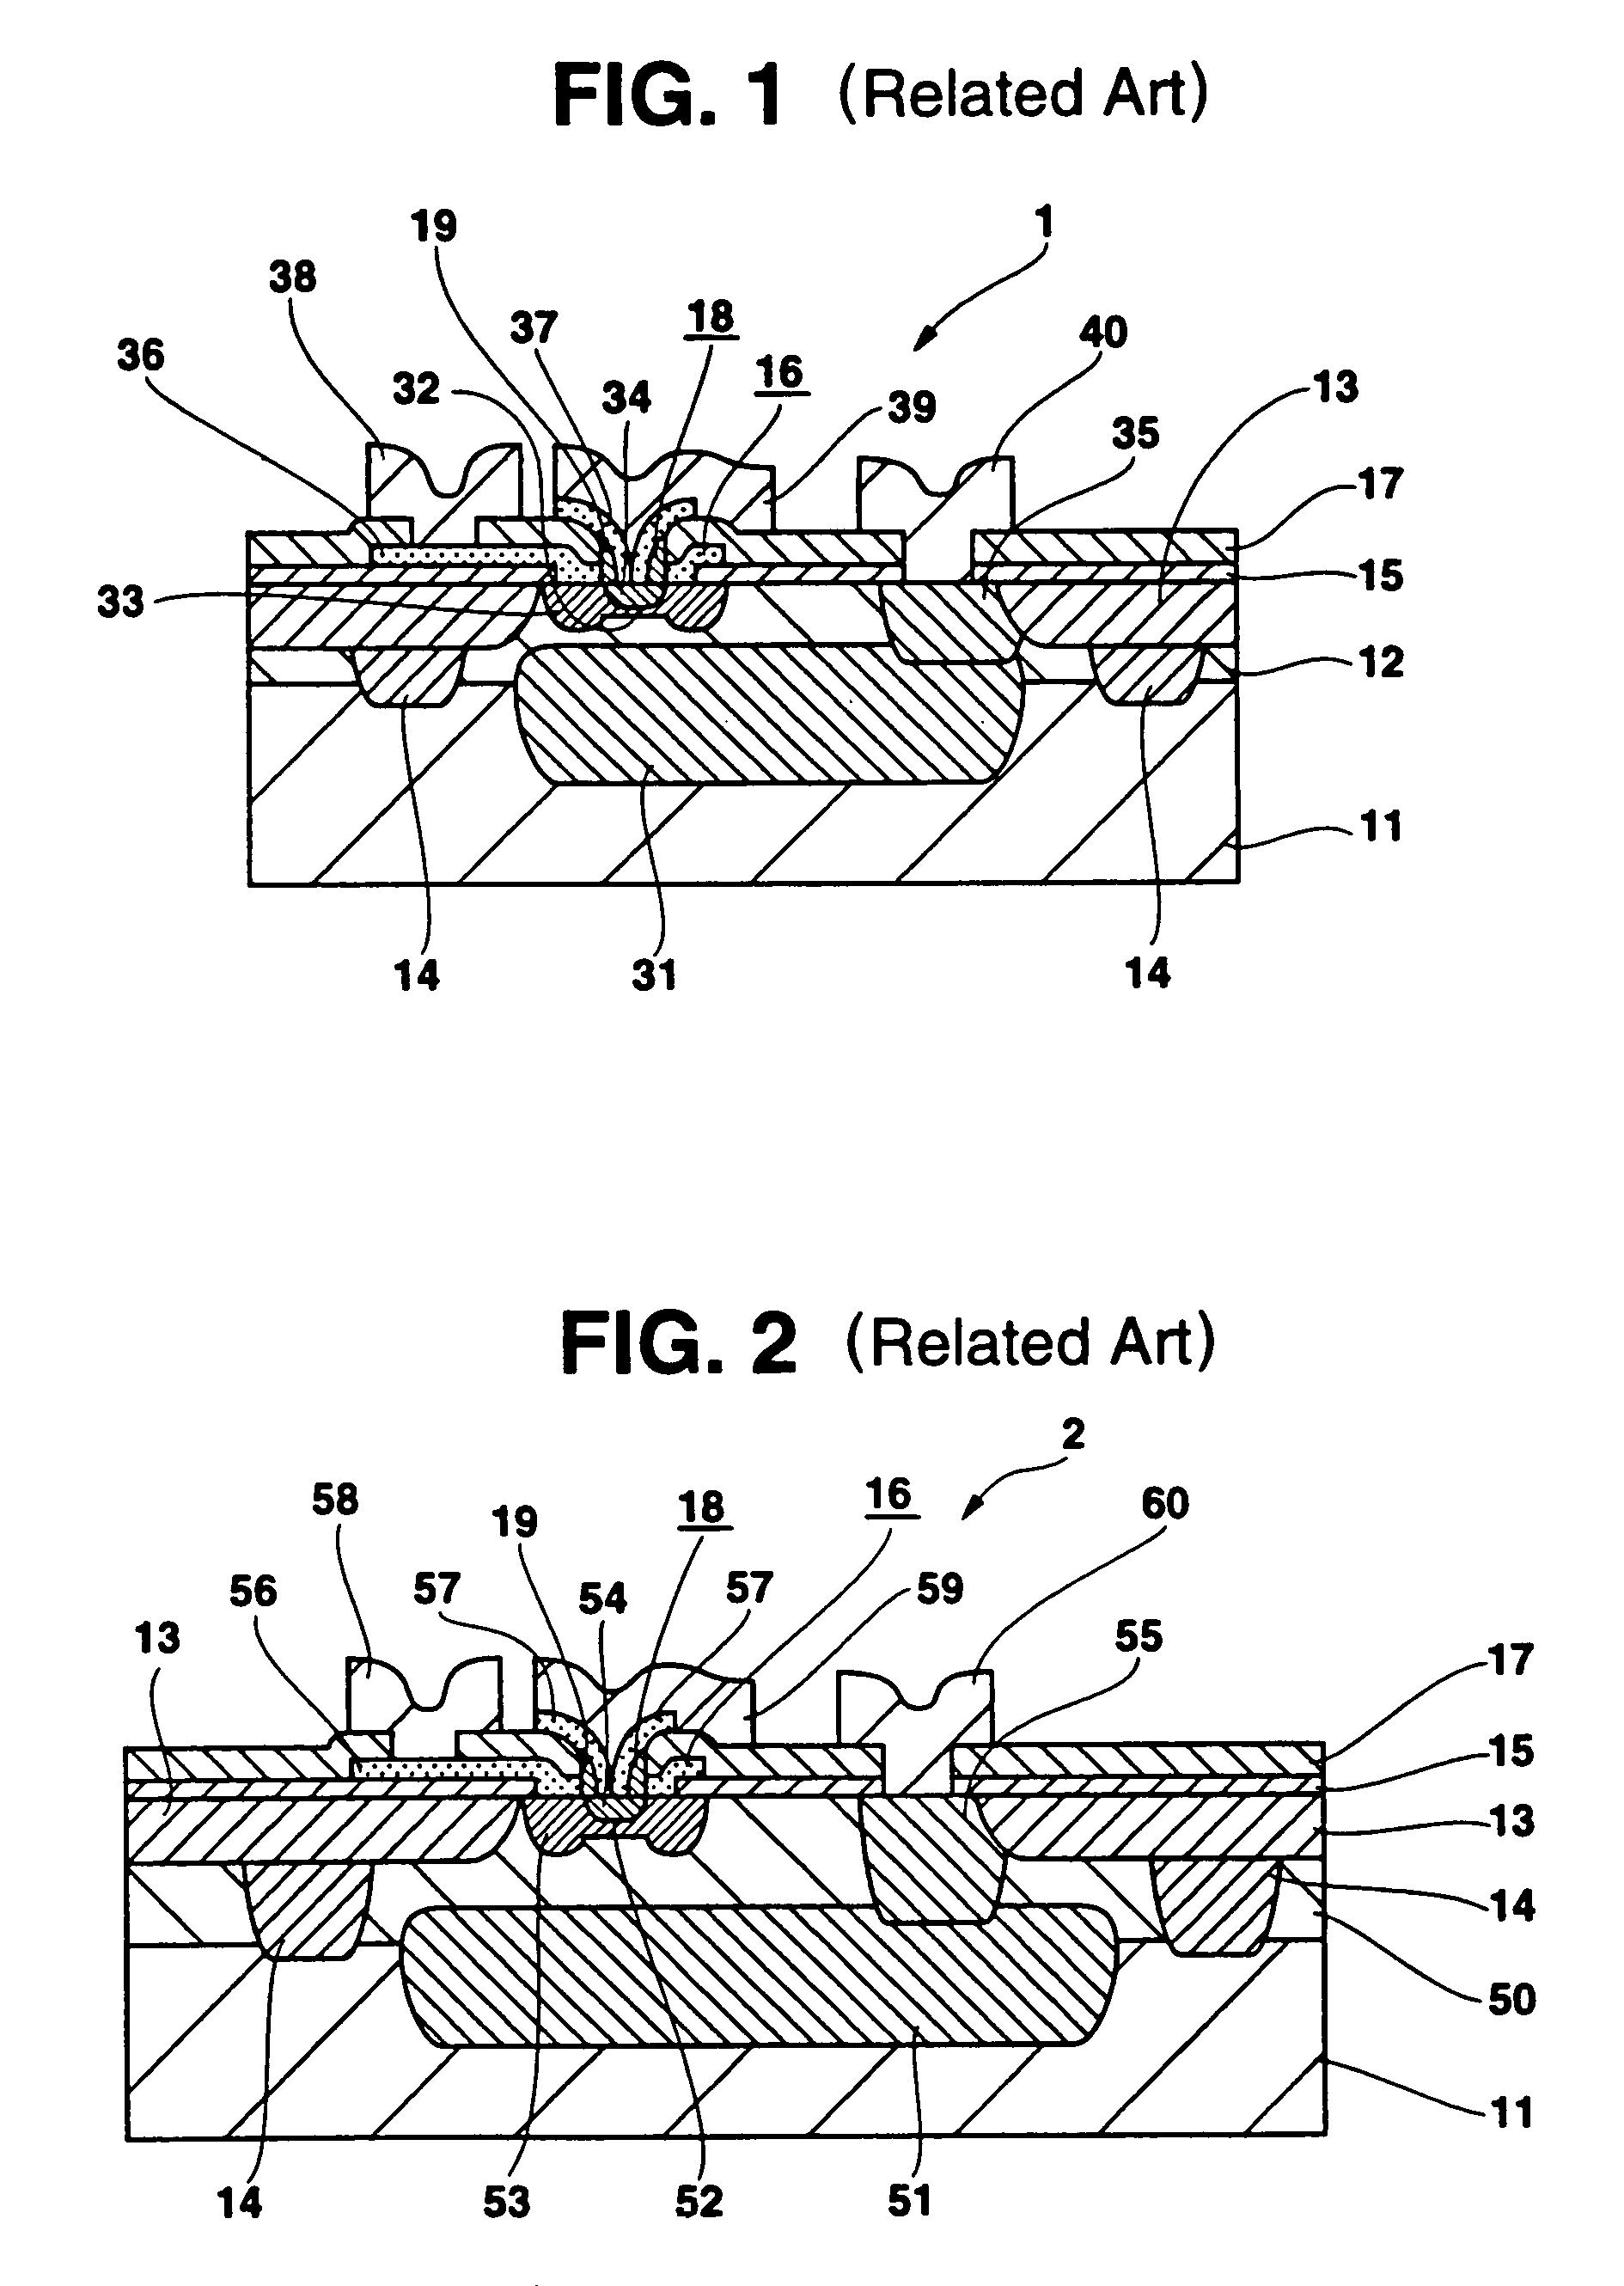 Semiconductor device including high speed transistors and high voltage transistors disposed on a single substrate